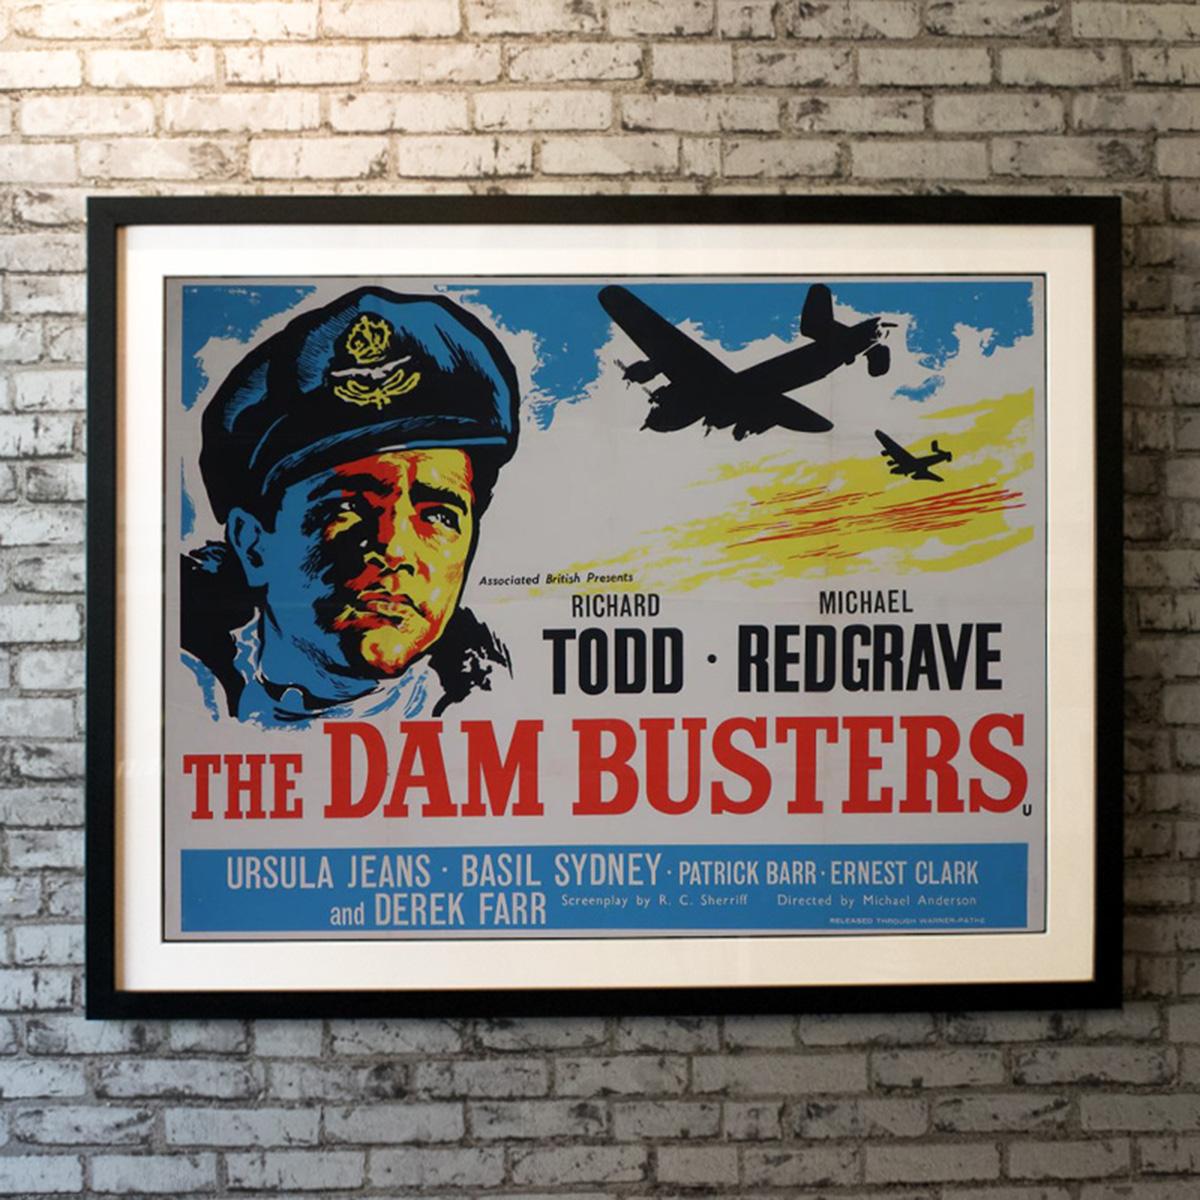 Country-of-origin UK quad for this very British tale of heroism and ingenuity in the allied efforts to destroy the german dams in WW2. This is from the 1960s re-release featuring a duotone version of the original full colour artwork from the 1955